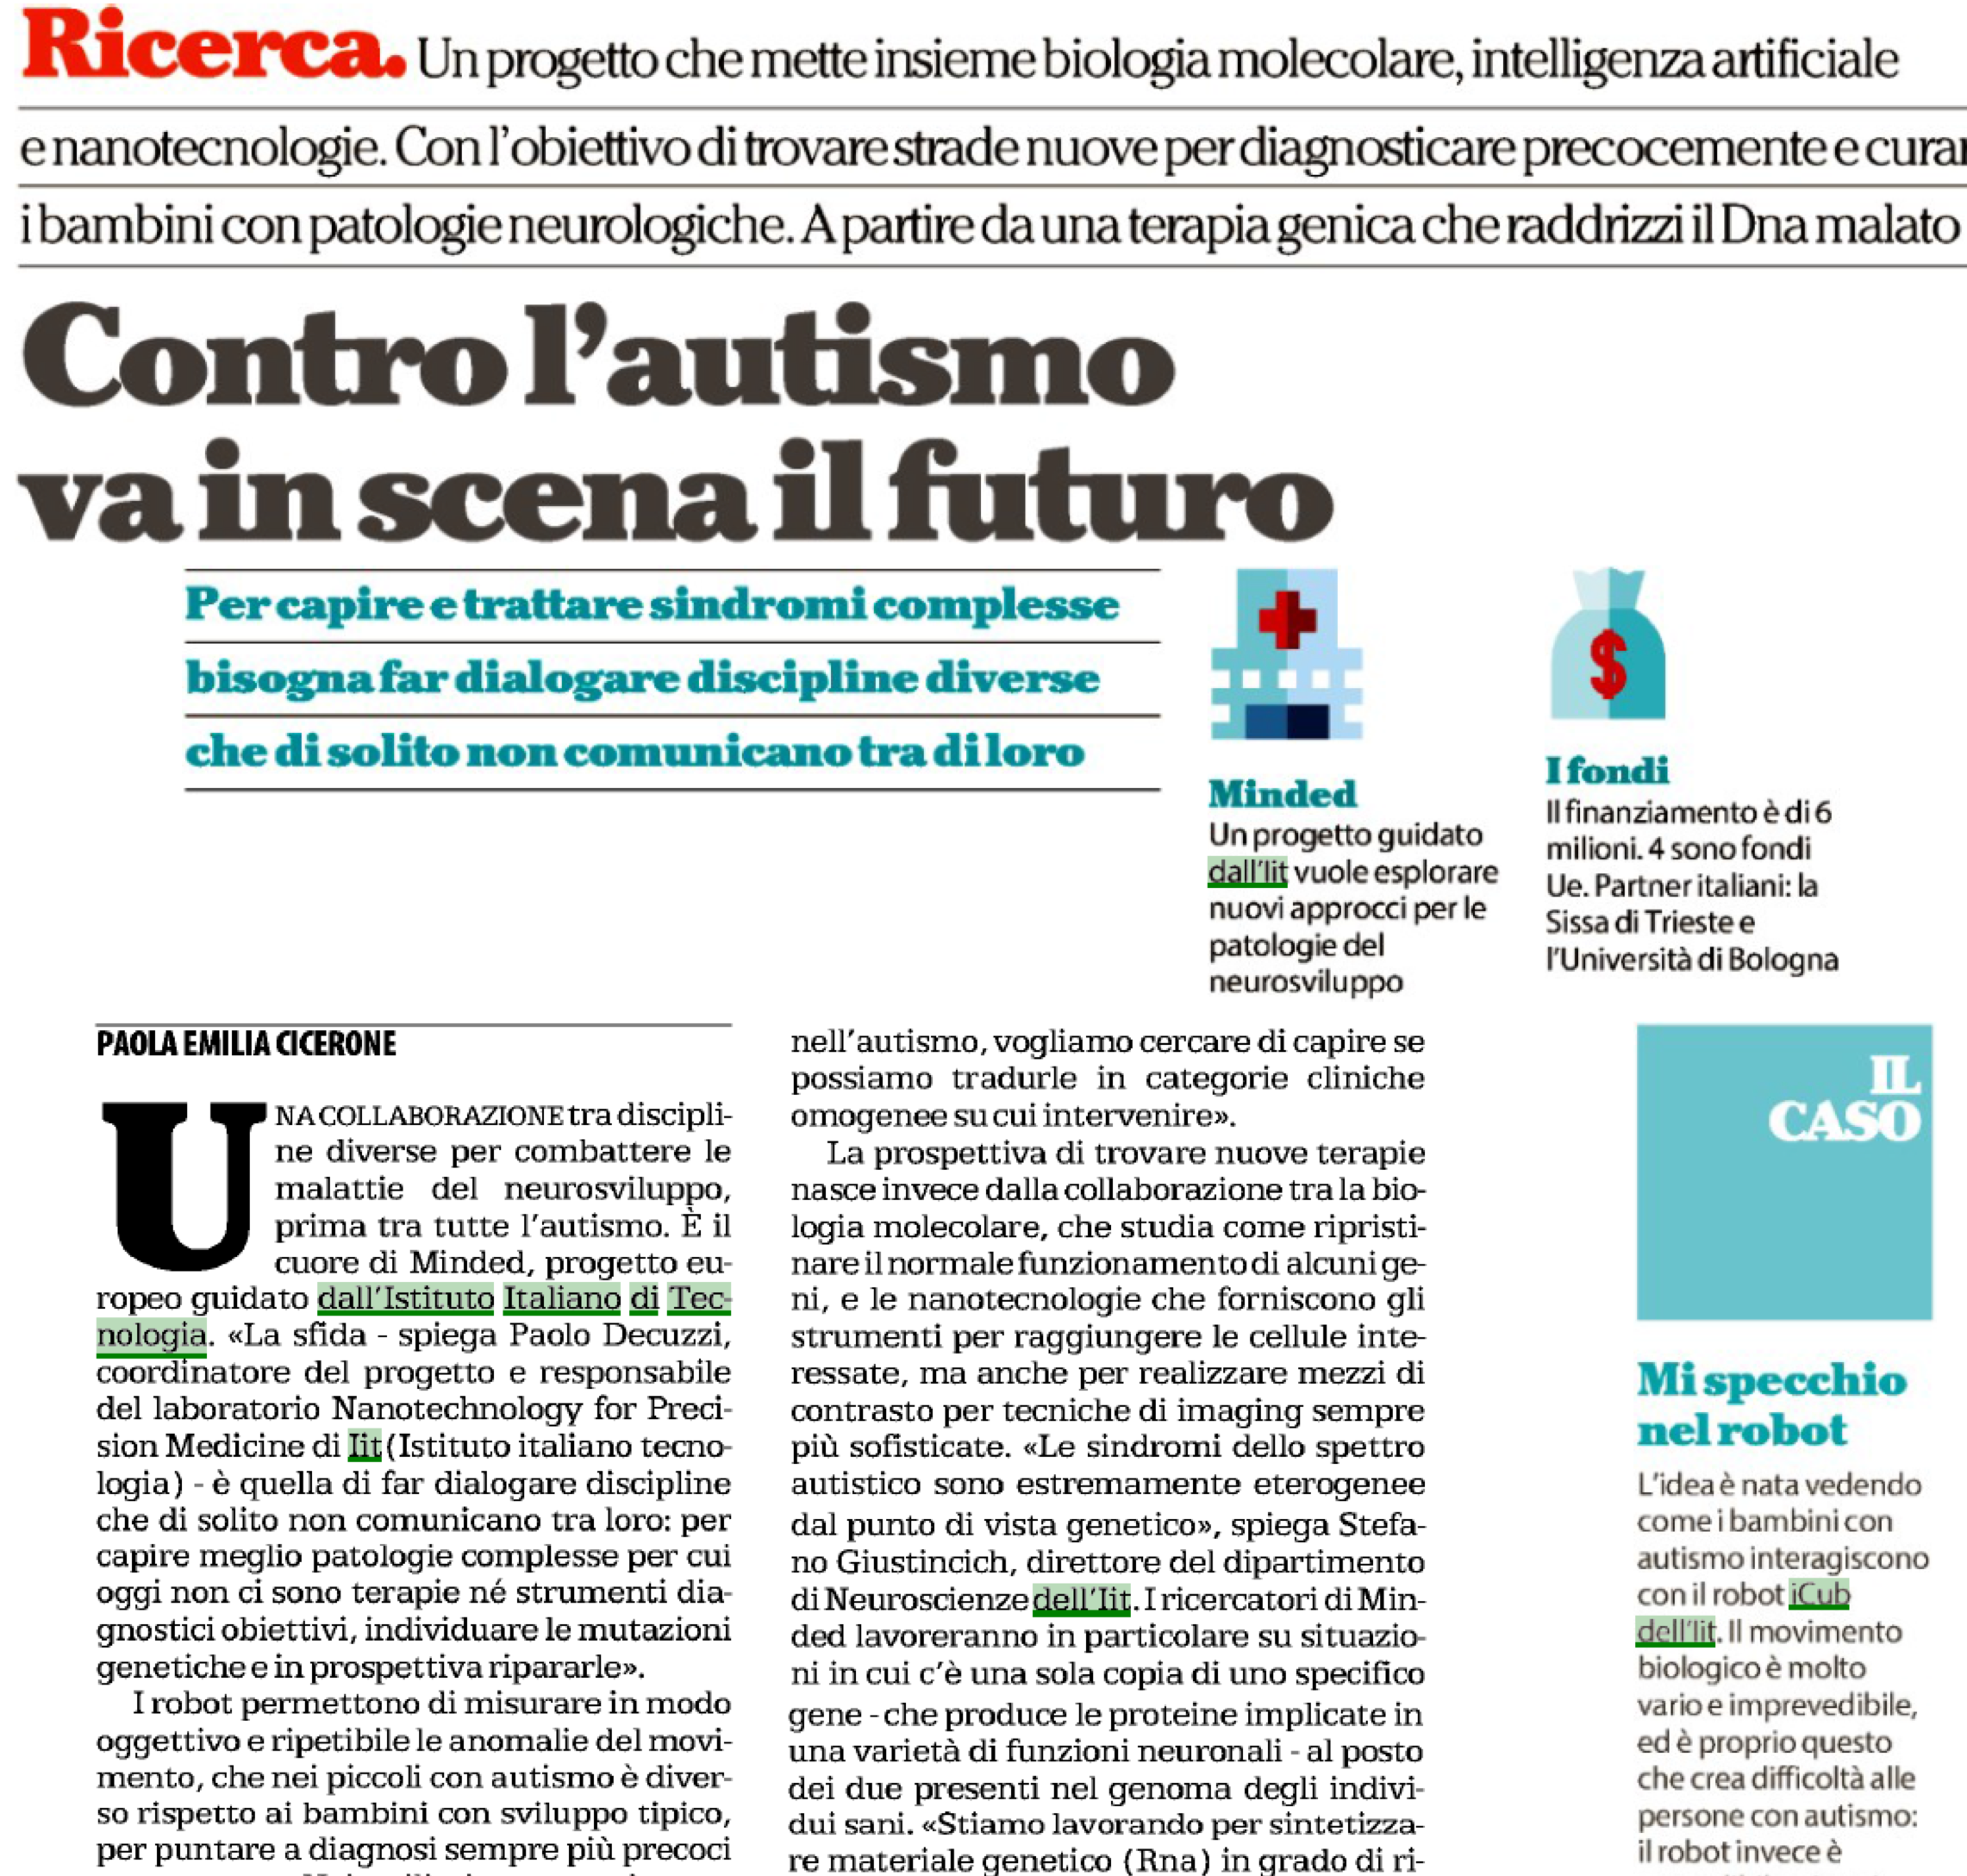 press-review-minded-repubblica